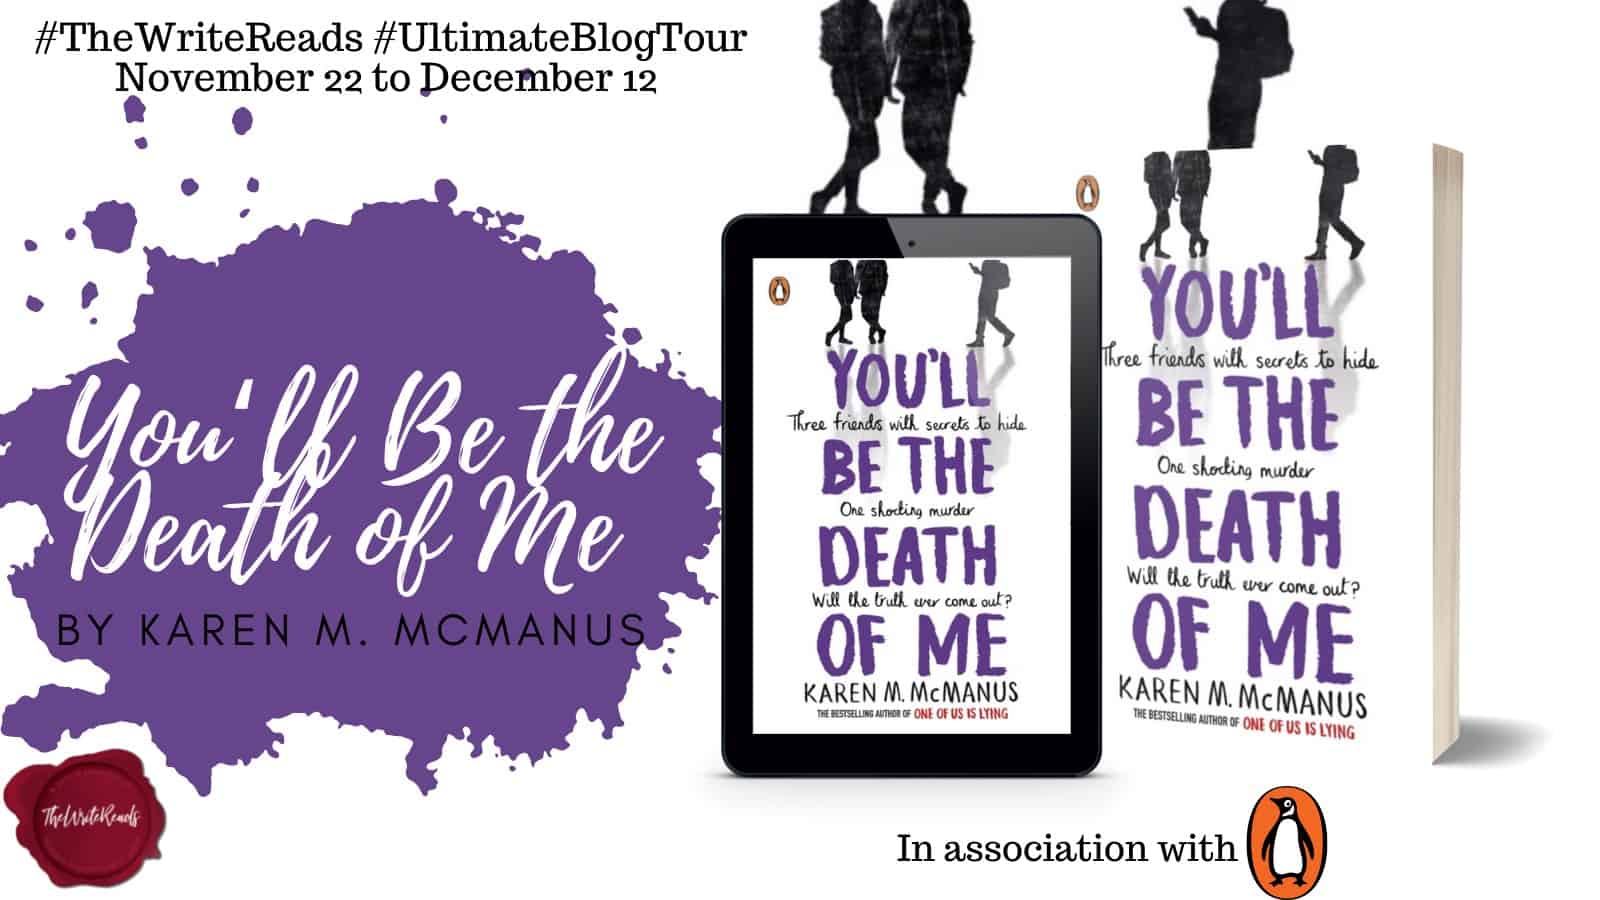 You'll Be The Death Of Me by Karen M. McManus | My Review of the #1 Best-Seller!